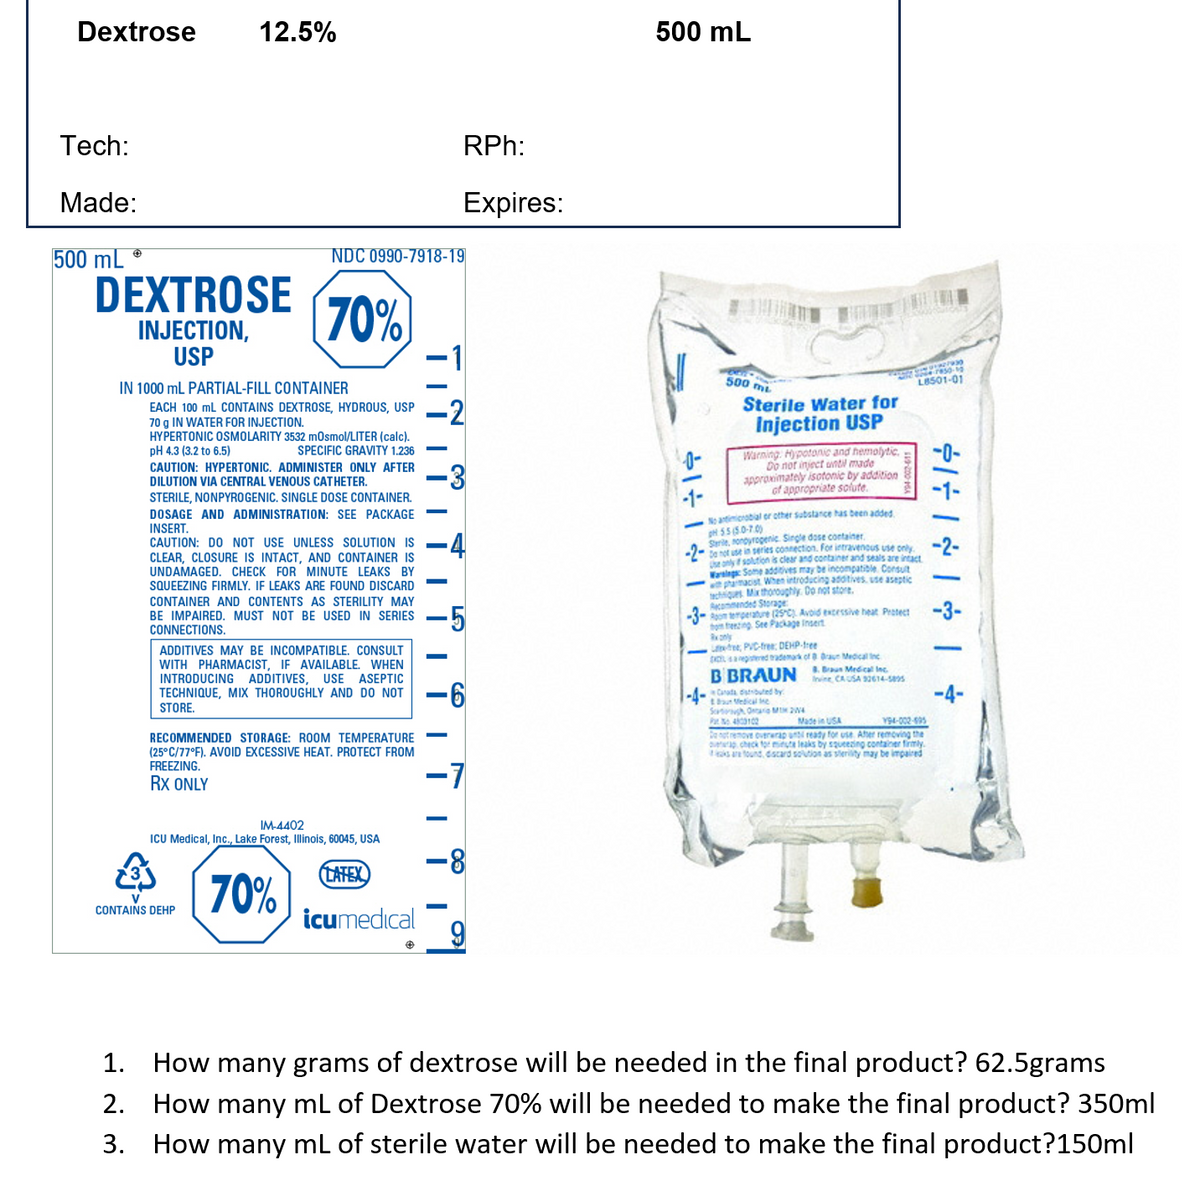 Dextrose
Tech:
Made:
500 mL
12.5%
DEXTROSE
INJECTION,
USP
IN 1000 mL PARTIAL-FILL CONTAINER
NDC 0990-7918-19
70%
EACH 100 mL CONTAINS DEXTROSE, HYDROUS, USP
70 g IN WATER FOR INJECTION.
HYPERTONIC OSMOLARITY 3532 mOsmol/LITER (calc).
pH 4.3 (3.2 to 6.5)
SPECIFIC GRAVITY 1.236
CAUTION: HYPERTONIC. ADMINISTER ONLY AFTER
DILUTION VIA CENTRAL VENOUS CATHETER.
ADDITIVES MAY BE INCOMPATIBLE. CONSULT
WITH PHARMACIST, IF AVAILABLE. WHEN
INTRODUCING ADDITIVES, USE ASEPTIC
TECHNIQUE, MIX THOROUGHLY AND DO NOT
STORE.
CONTAINS DEHP
RECOMMENDED STORAGE: ROOM TEMPERATURE
(25°C/77°F). AVOID EXCESSIVE HEAT. PROTECT FROM
FREEZING.
RX ONLY
IM-4402
ICU Medical, Inc., Lake Forest, Illinois, 60045, USA
70%
STERILE, NONPYROGENIC. SINGLE DOSE CONTAINER.
DOSAGE AND ADMINISTRATION: SEE PACKAGE
INSERT.
CAUTION: DO NOT USE UNLESS SOLUTION IS
CLEAR, CLOSURE IS INTACT, AND CONTAINER IS
UNDAMAGED. CHECK FOR MINUTE LEAKS BY
SQUEEZING FIRMLY. IF LEAKS ARE FOUND DISCARD
CONTAINER AND CONTENTS AS STERILITY MAY
BE IMPAIRED. MUST NOT BE USED IN SERIES -5
CONNECTIONS.
LATEX
||||II
icumedical
RPh:
Expires:
|||||
11
2
3
-6
-7
-8
9
500 mL
÷ | & | 11
-1-
500 mi
Sterile Water for
Injection USP
Warning: Hypotonic and hemolytic
Do not inject until made
approximately isotonic by addition
of appropriate solute.
No antimicrobial or other substance has been added.
pH 5.5(50-7.0)
Sterile, nonoyrogenic Single dose container
Do not use in series connection. For intravenous use only.
he only if solution is clear and container and seals are intact
Warnings: Some additives may be incompatible Consult
with pharmacist When introducing additives, use aseptic
techniques. Mix thoroughly. Do not store.
Recommended Storage
Room temperature (25°C) Avoid excessive heat Protect
tom freezing See Package Insert
Rx only
Lee, PVC-free: DEHP-free
is a registered trademark of 8 Braun Medical Inc
B BRAUN raun Medical Inc.
by
2793
Sere50-10
L8501-01
Invine, CA USA 32614-5895
& Braun Medical Me
Sortugh Ontario 24
Pat 4803102
Made in USA
194-002-995
Do not remove overwrap unt ready for use. After removing the
up check for minute leaks by squeezing container firmly.
aks are found discard solution as sterility may be impaired
÷ | & | & | ÷14
-3-
-4-
1. How many grams of dextrose will be needed in the final product? 62.5grams
2. How many mL of Dextrose 70% will be needed to make the final product? 350ml
3. How many mL of sterile water will be needed to make the final product?150ml